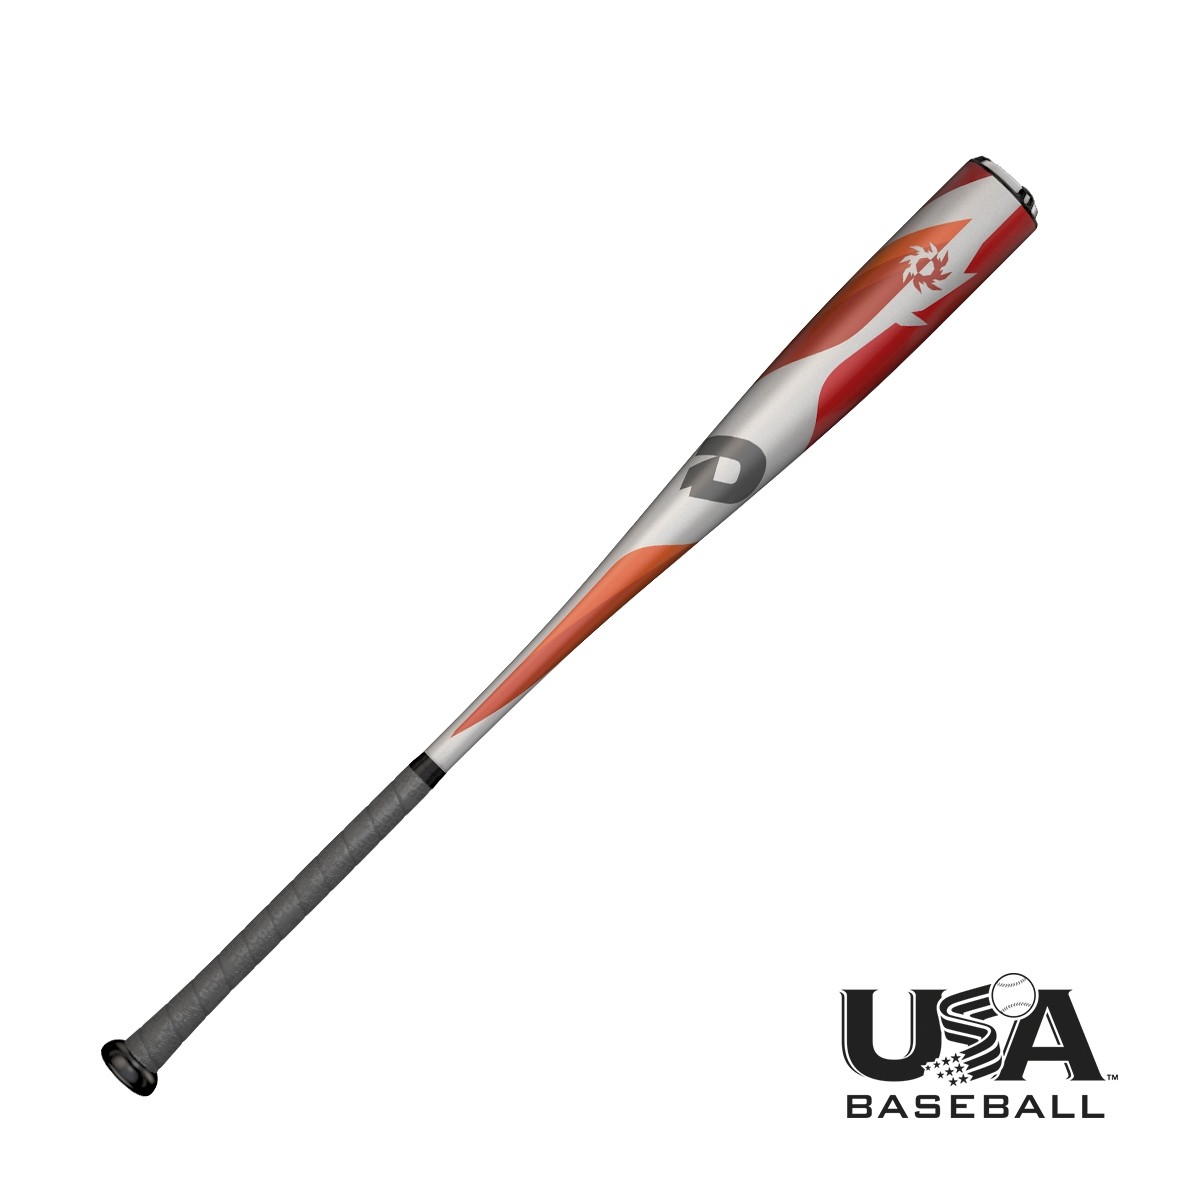 `-10 length to weight ratio 2 5/8 inch barrel diameter Balanced swing weight Approved for play in USA Baseball One year manufacturer's warranty The all new 2018 Voodoo One Balanced USA Baseball bat from DeMarini is a great light-swinging option for the junior high aged player who prefers the feel of a one-piece aluminum bat. DeMarini's X14 Alloy allows for more precise weight distribution and the 3Fusion End Cap optimizes the bat's sweet spot for a sound and feel that players love. New for the 2018 season, these bats are certified for all USA Baseball play. Comes with a 1 year manufacturer's warranty from DeMarini. - -10 length to weight ratio - 2 5/8 inch barrel diameter - Balanced swing weight - One-Piece X14 Alloy for more precise weight distribution - 3Fusion End Cap optimizes sweet spot, sound and feel through the barrel - Approved for play in USA Baseball - One year manufacturer's warranty